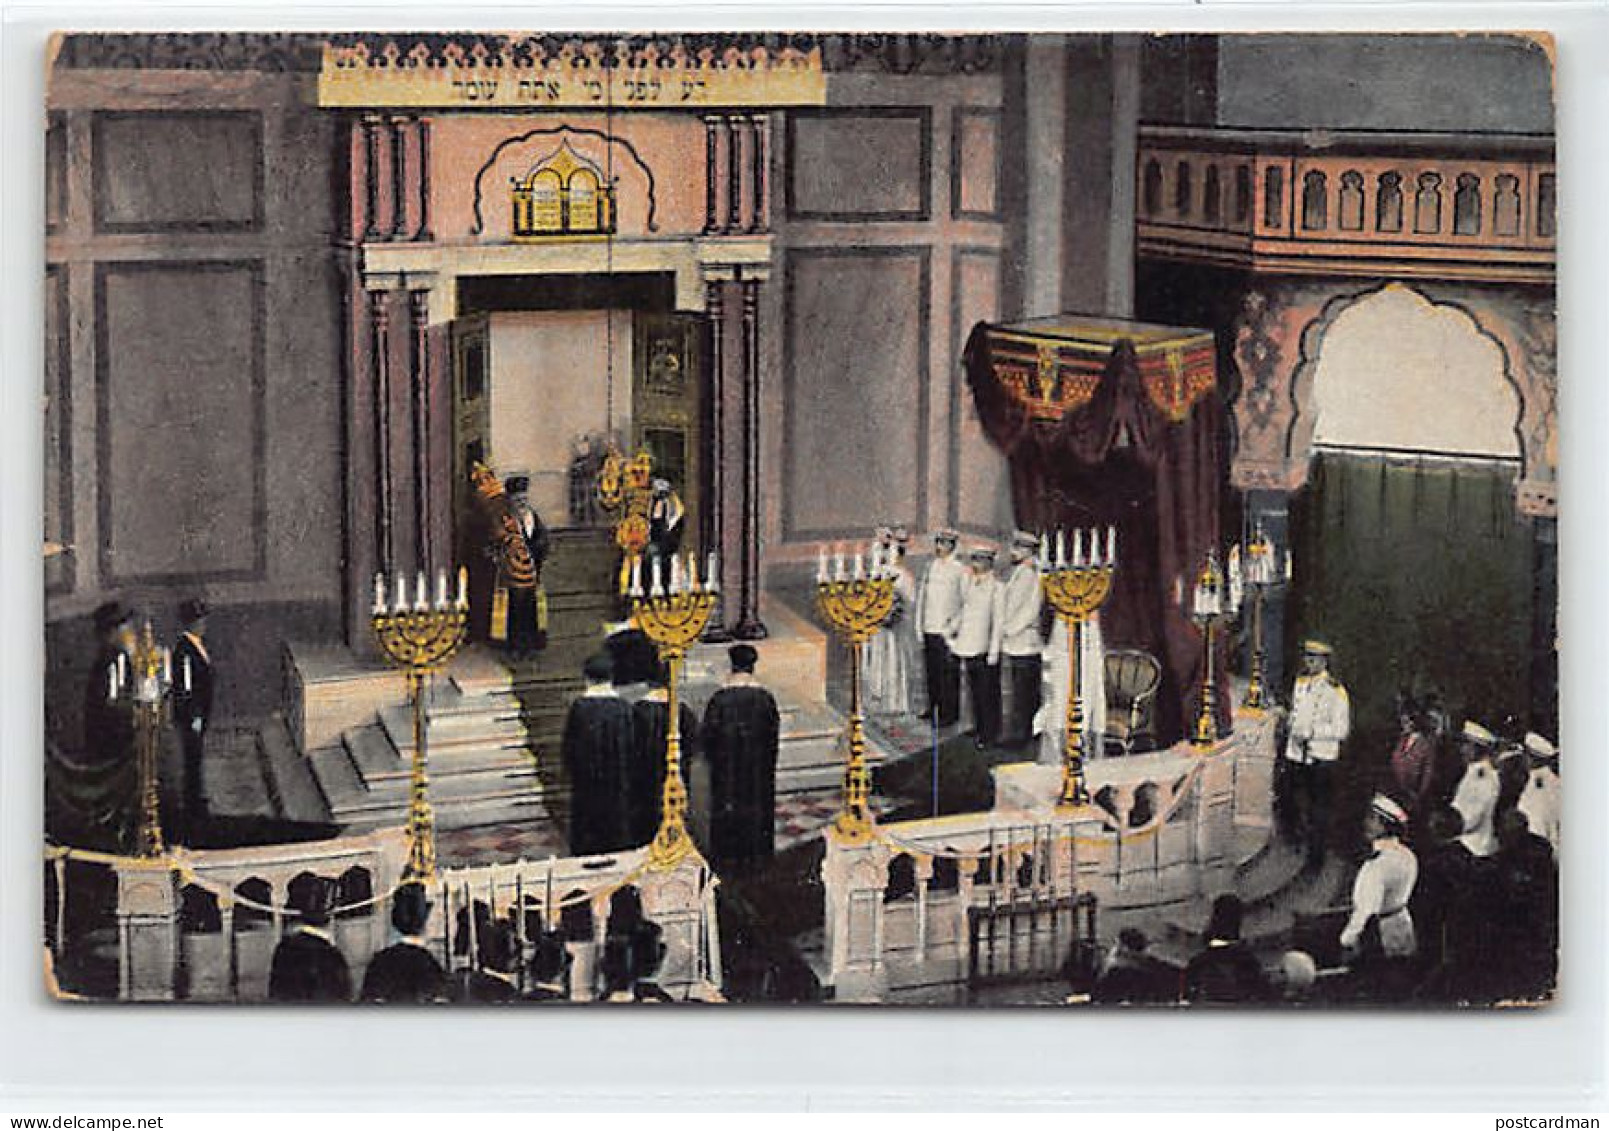 Judaica - BULGARIA - Sofia - The Interior Of The Synagogue During Its Inauguration On 9 September 1909 - Publ. Iv. D. Ba - Jewish